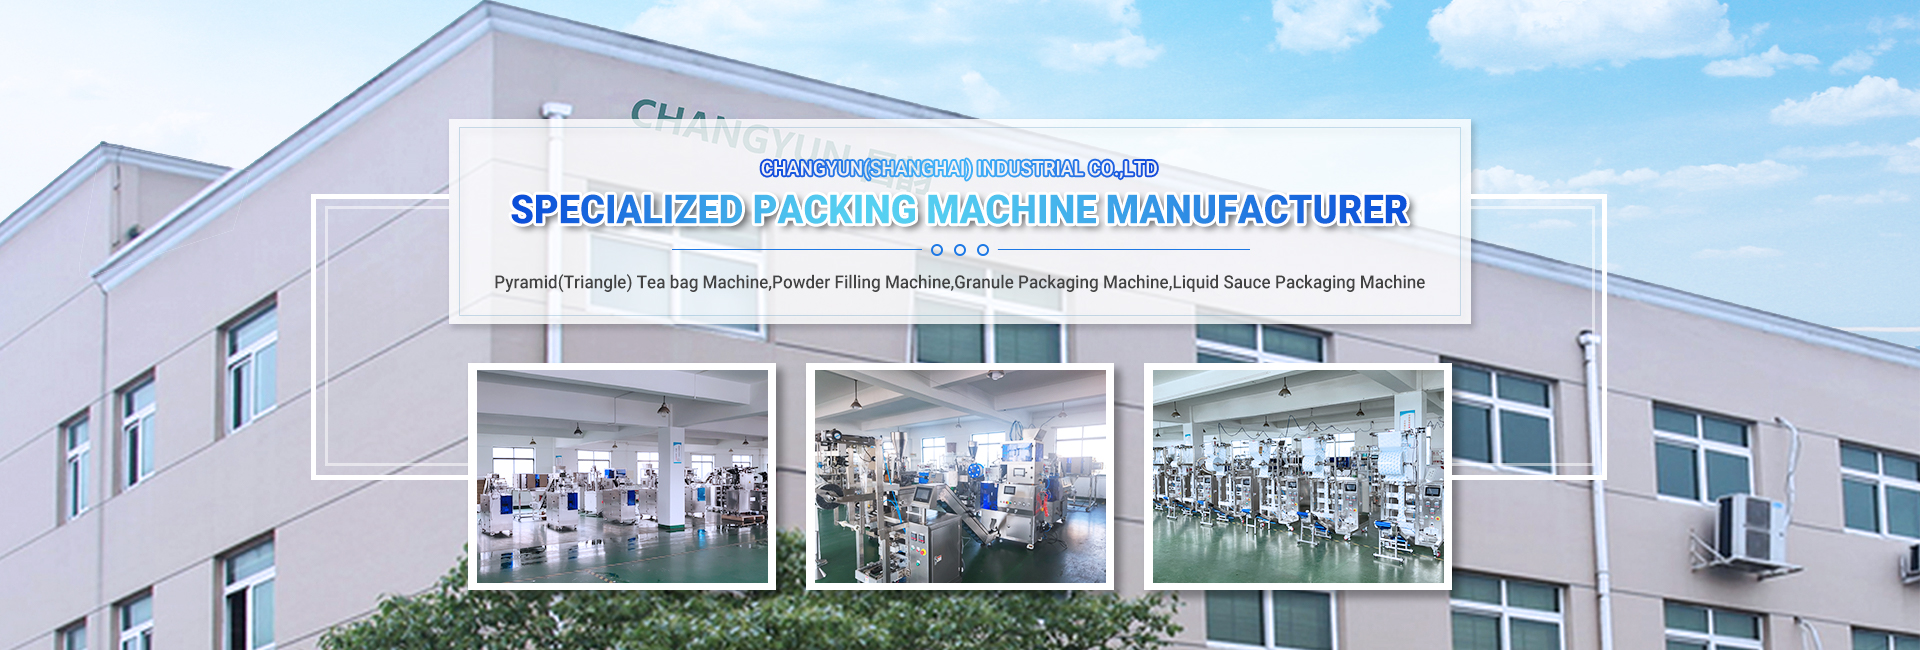 Specialized Packing Machine Manufacturer